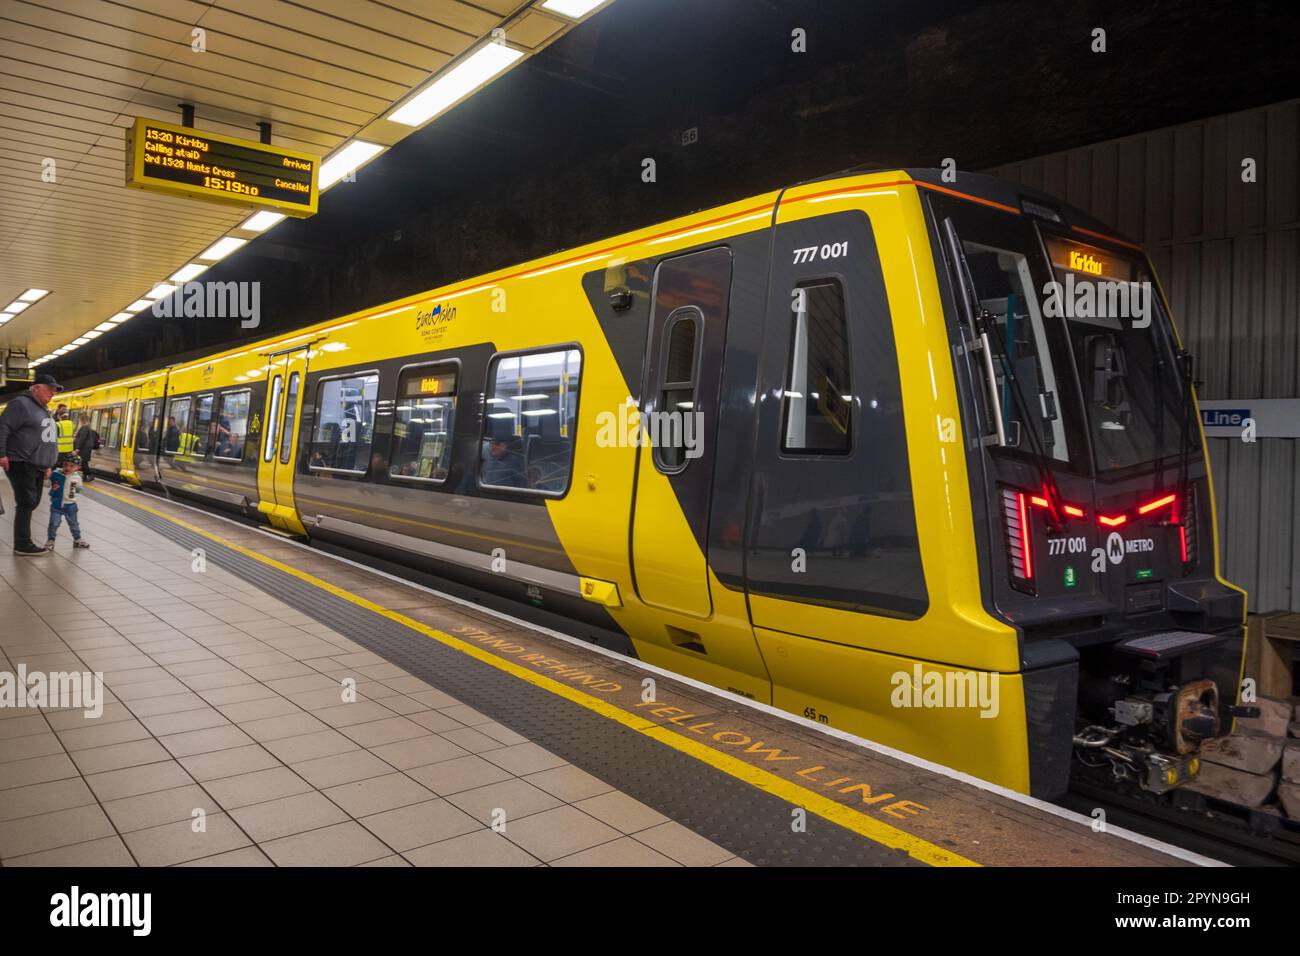 New Merseyrail Stadler Class 777 electric commuter train at Central station Liverpool. Stock Photo